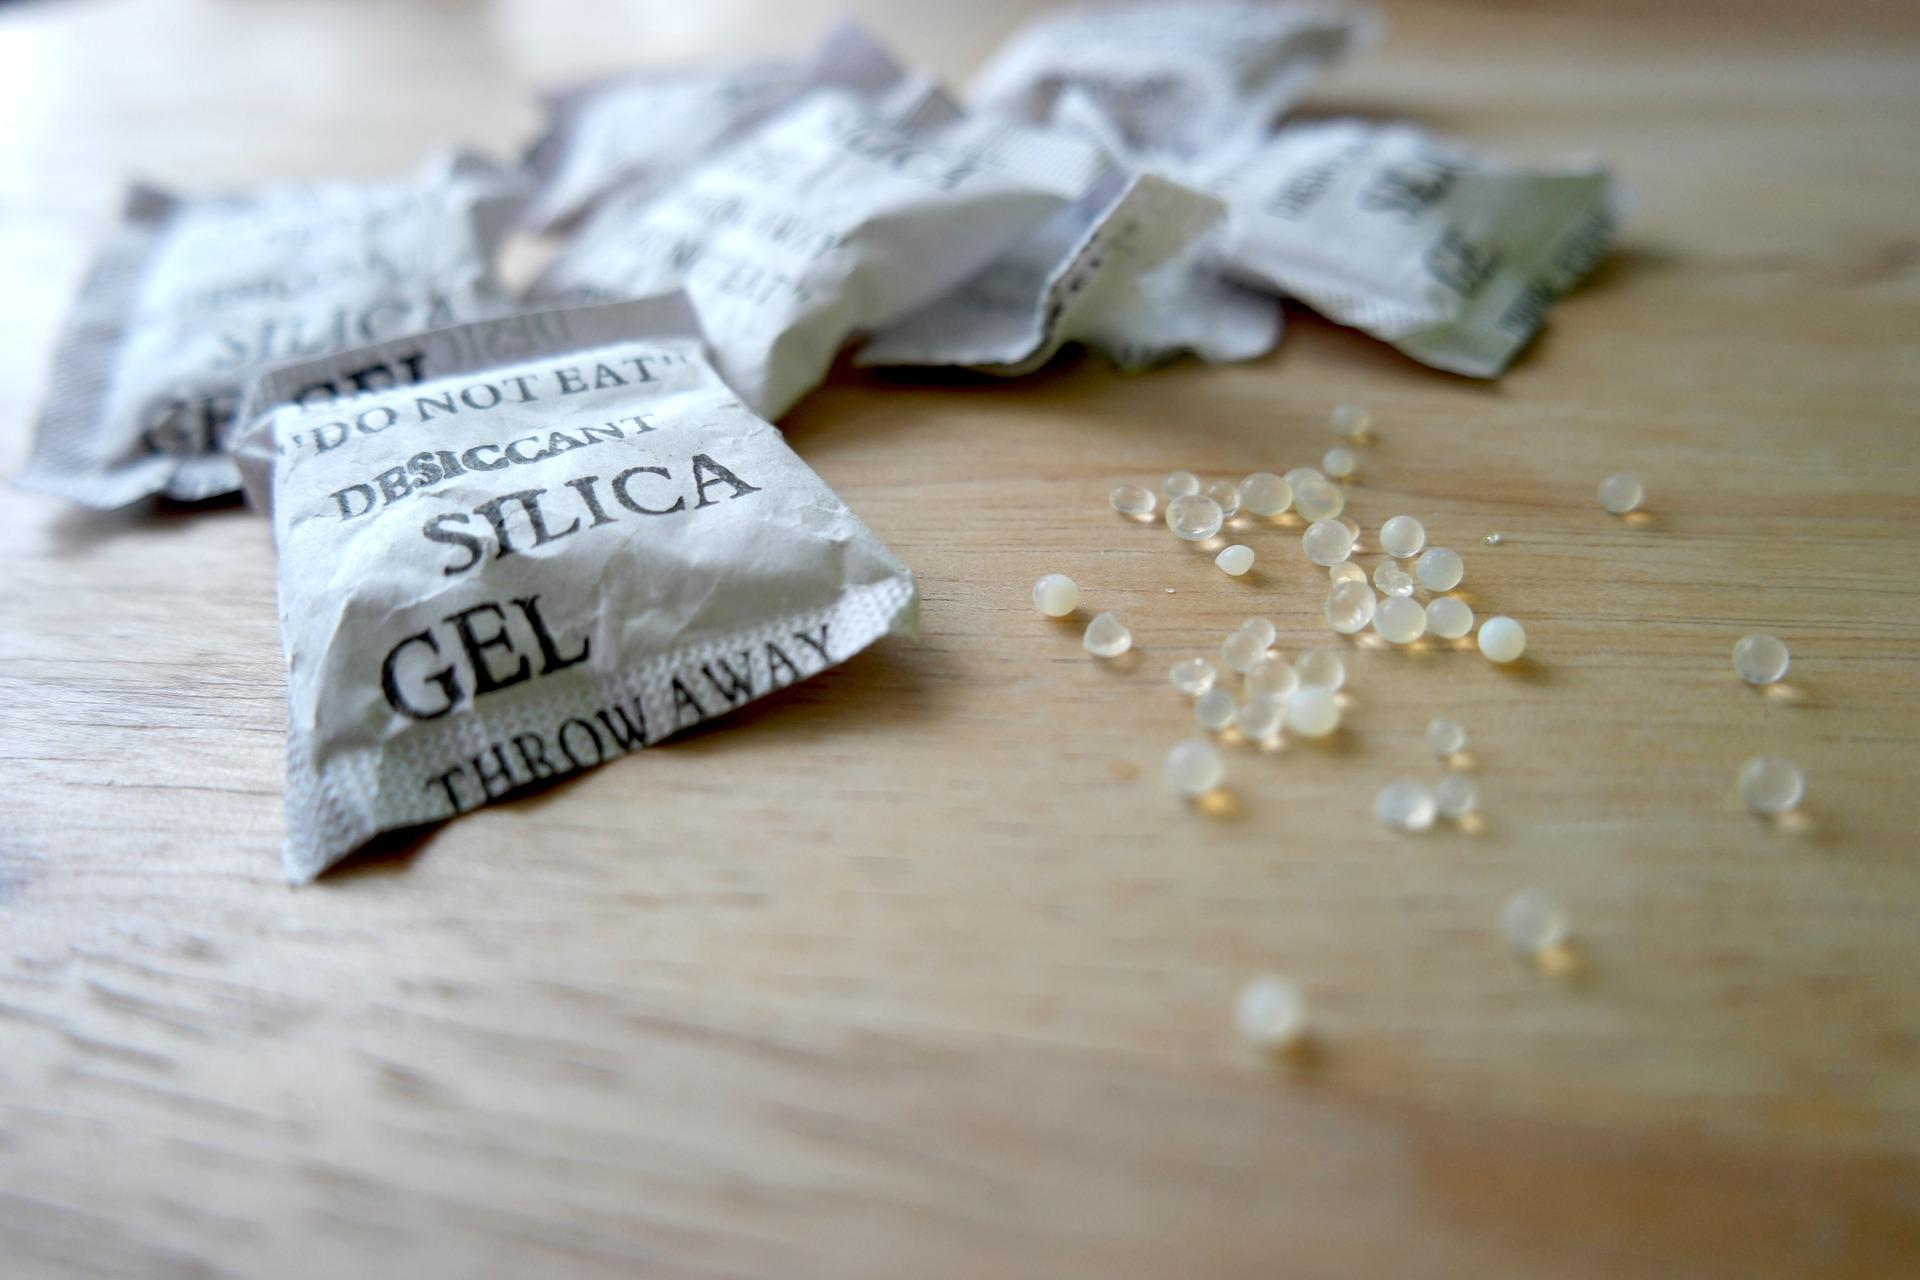 What is silica gel and why do I find little packets of it in everything I  buy?